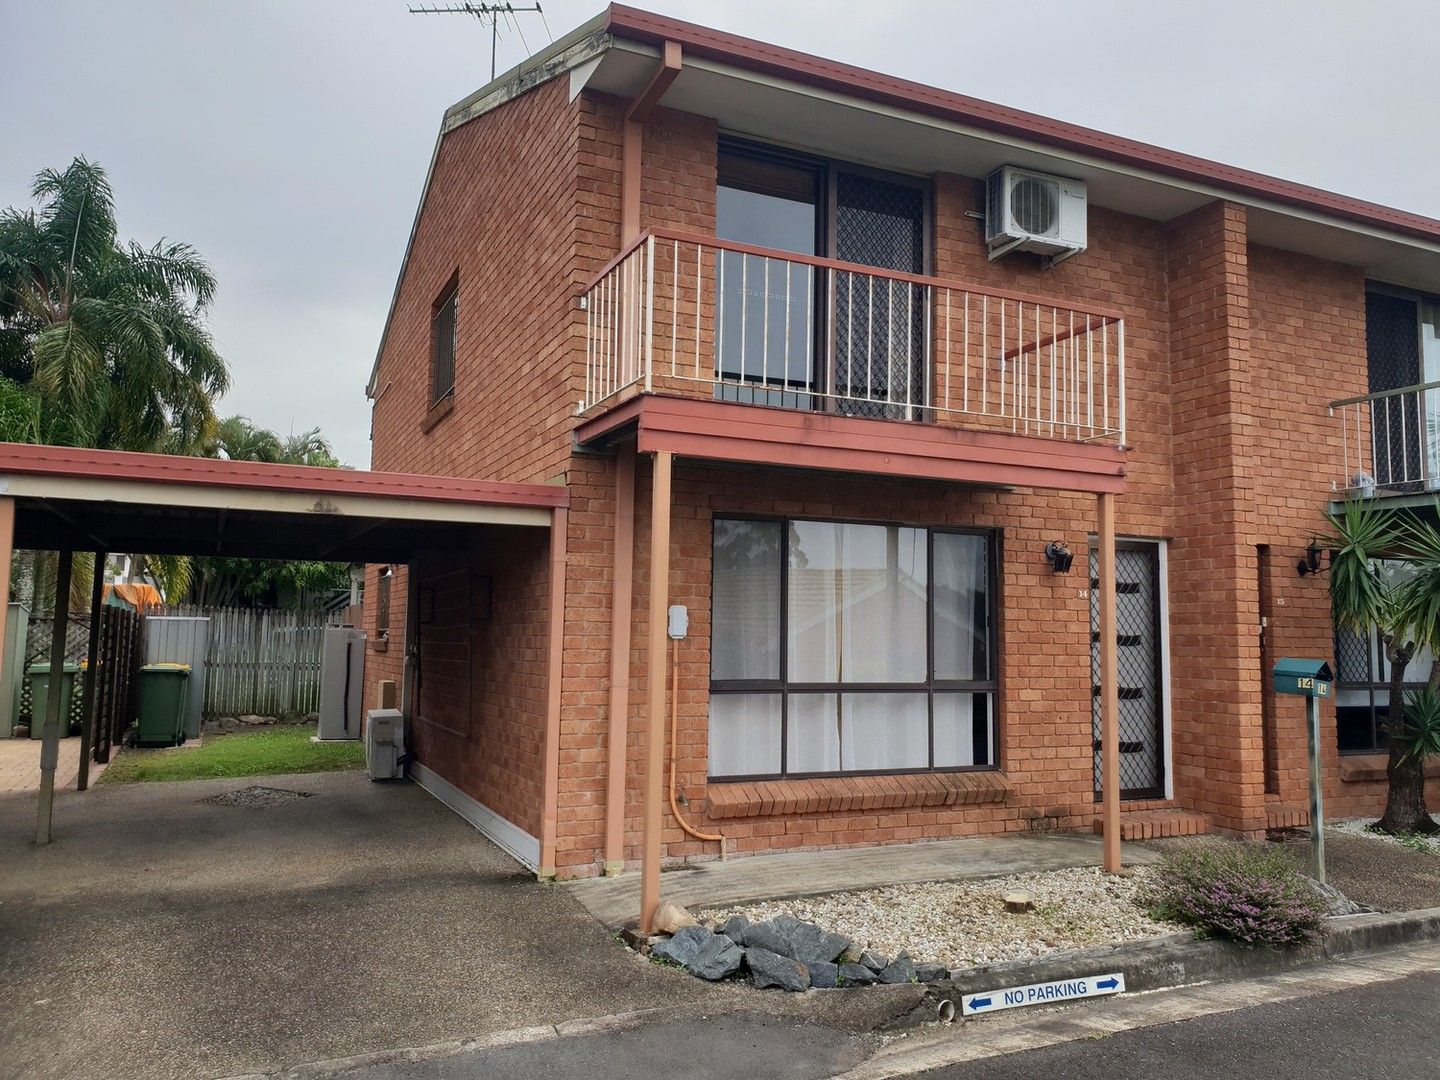 3 bedrooms Townhouse in 14/22a Kumbari Street ROCHEDALE SOUTH QLD, 4123